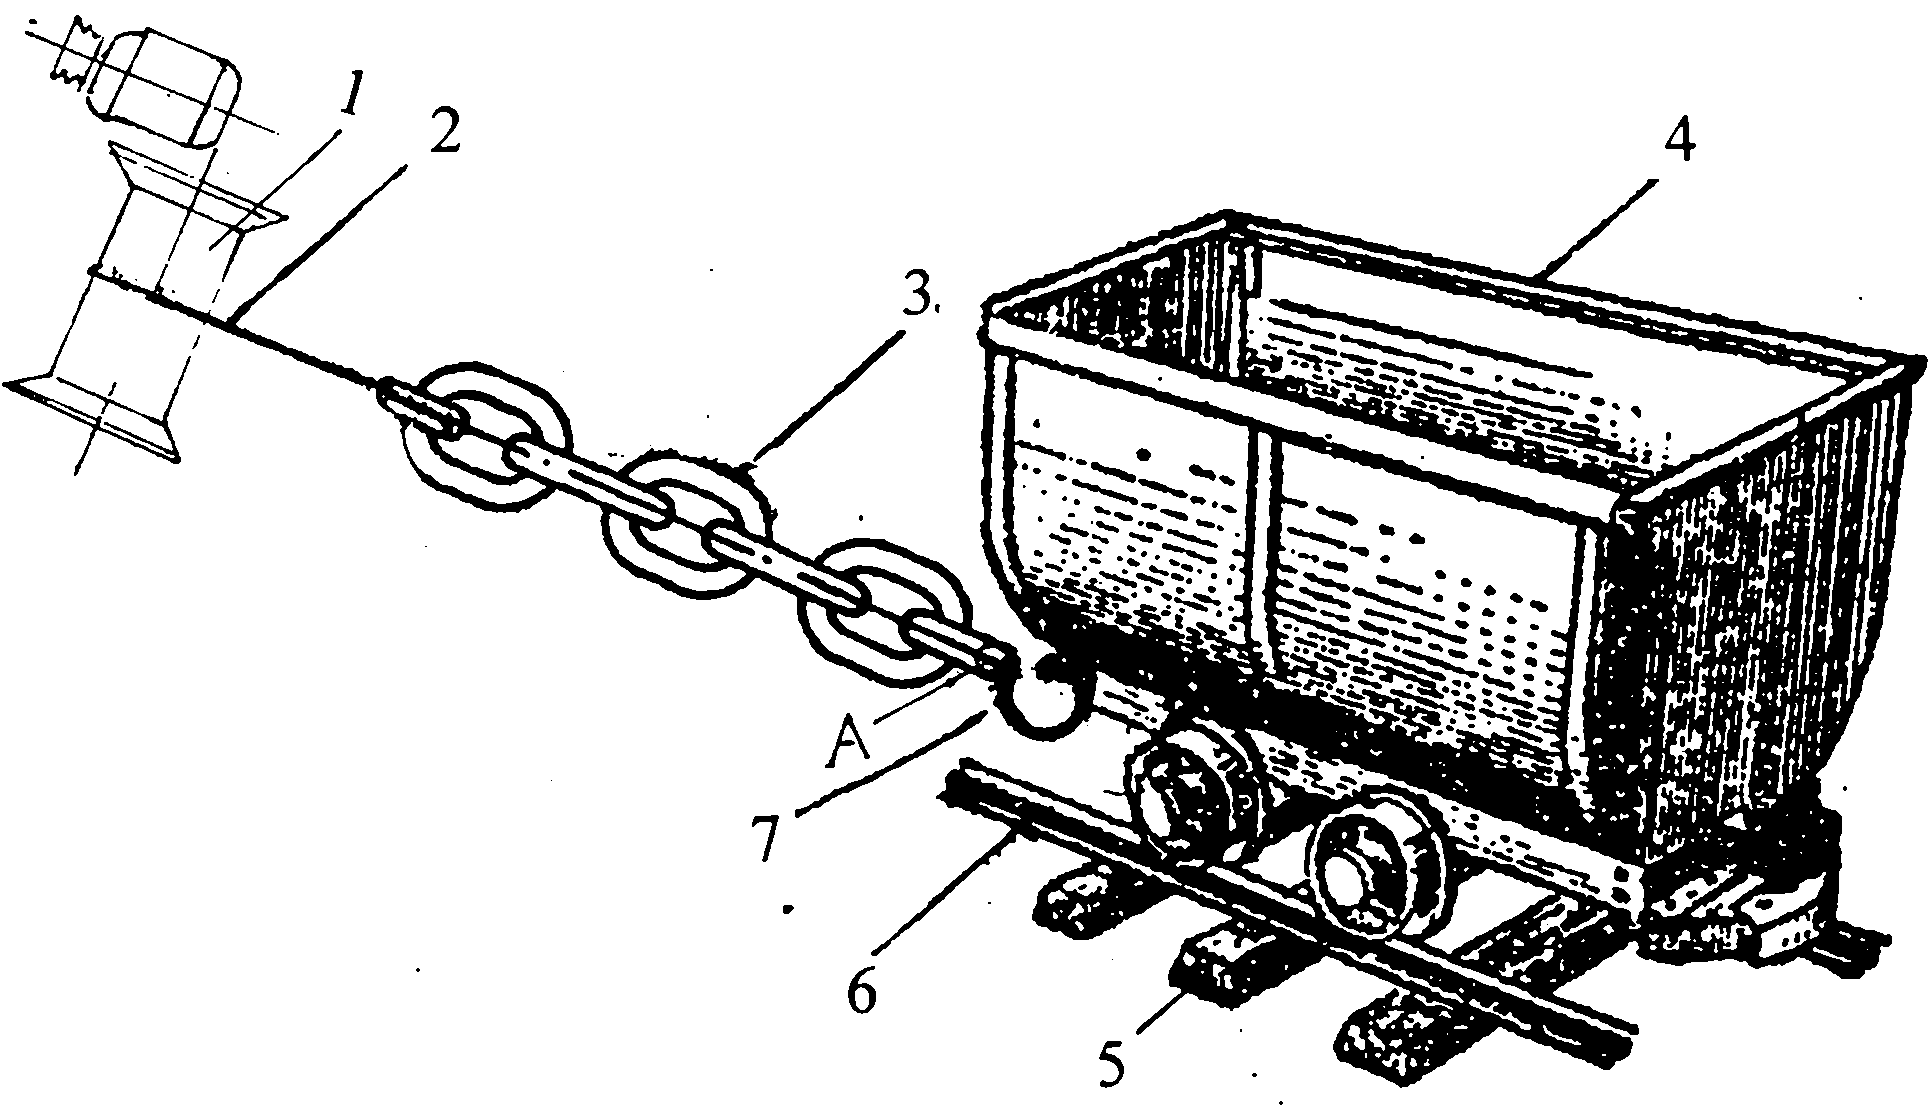 Annular chain safe device of winch for lifting